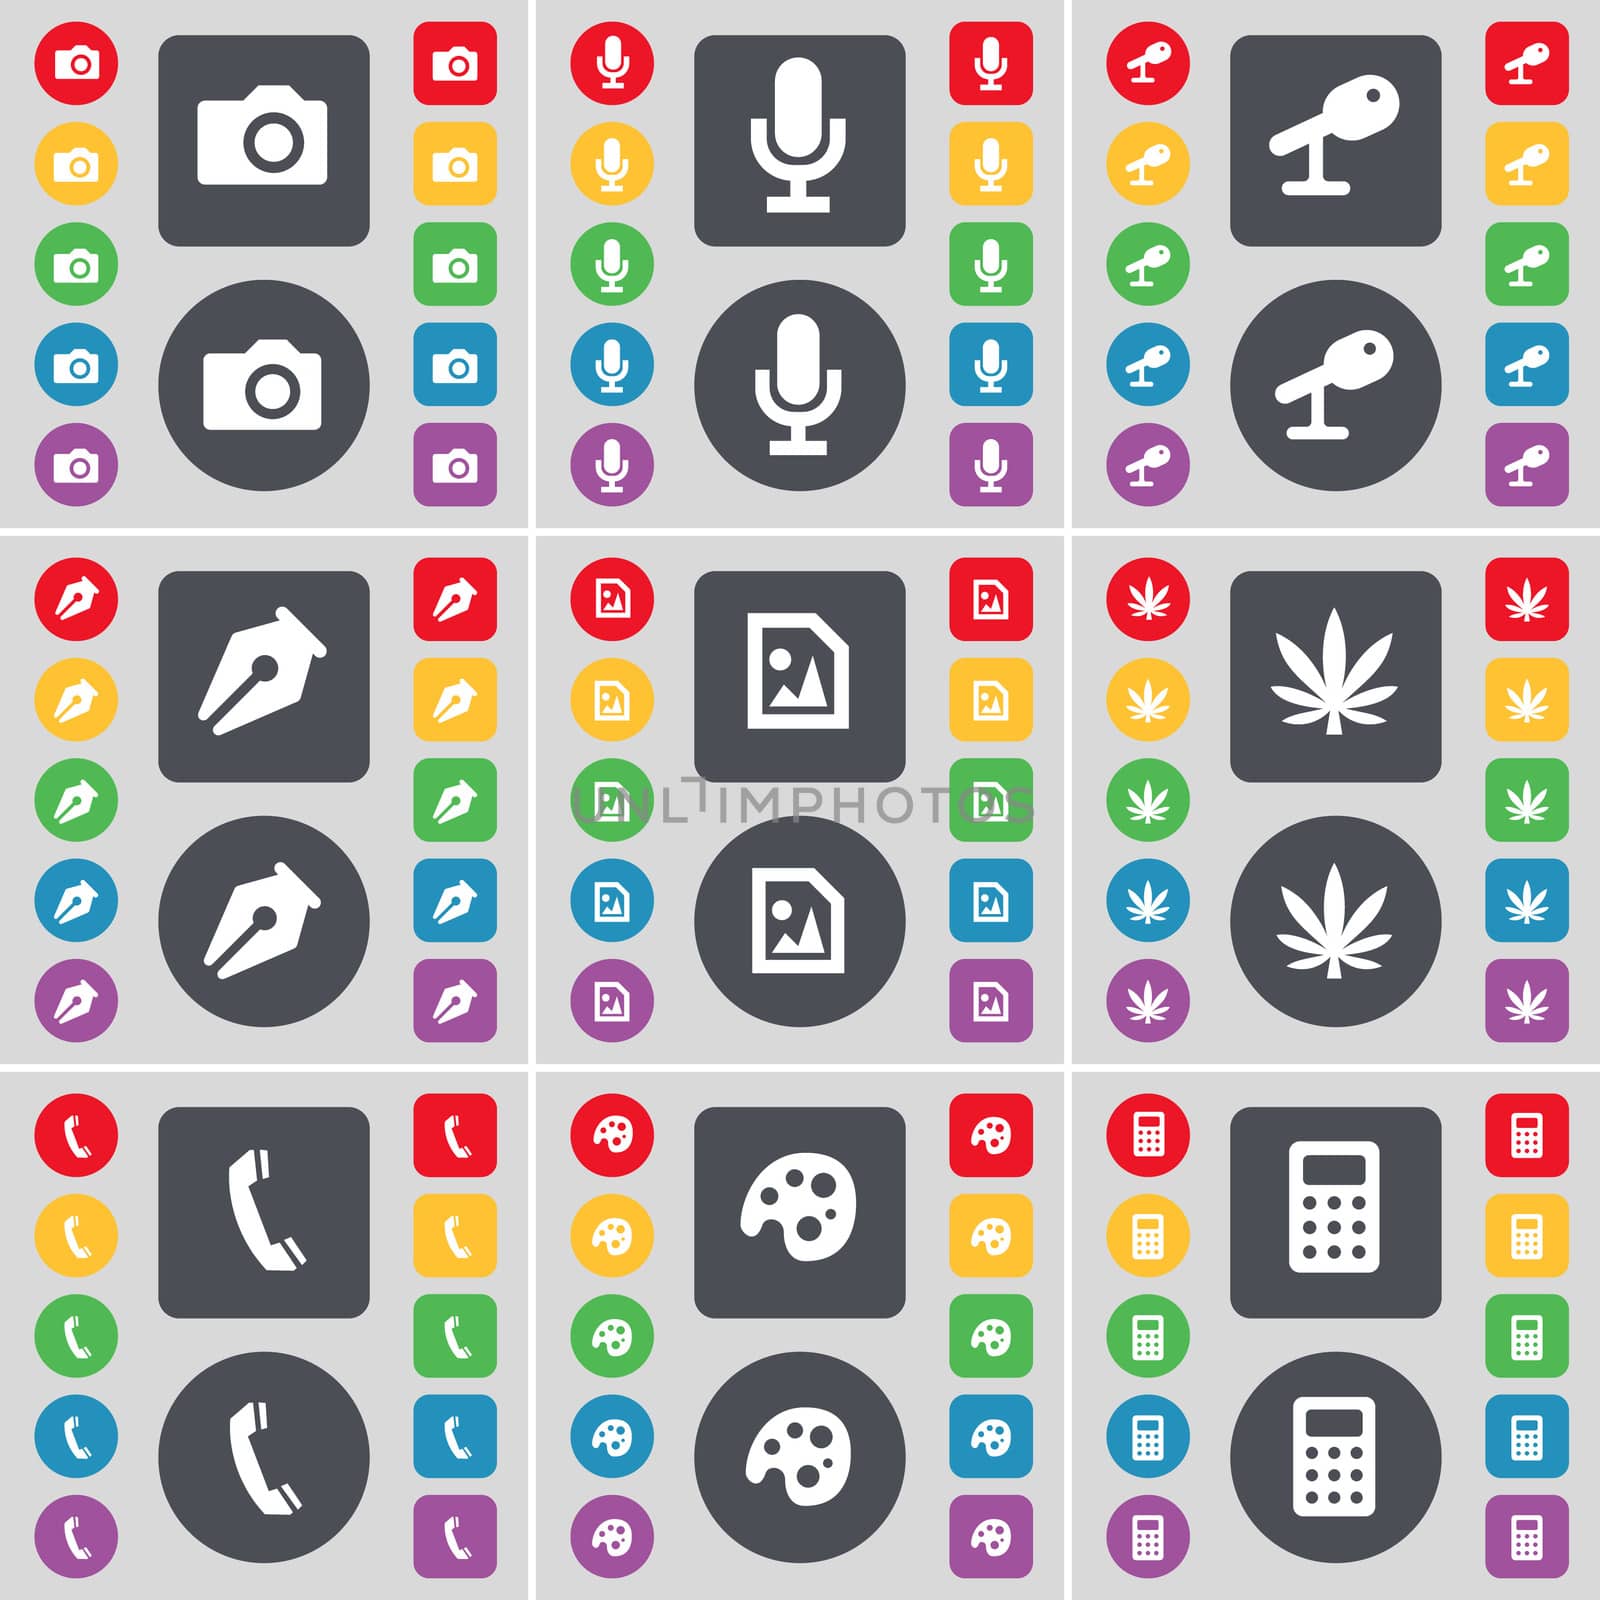 Camera, Microphone, Ink pen, Media file, Marijuana, Receiver, Palette, Calculator icon symbol. A large set of flat, colored buttons for your design. illustration